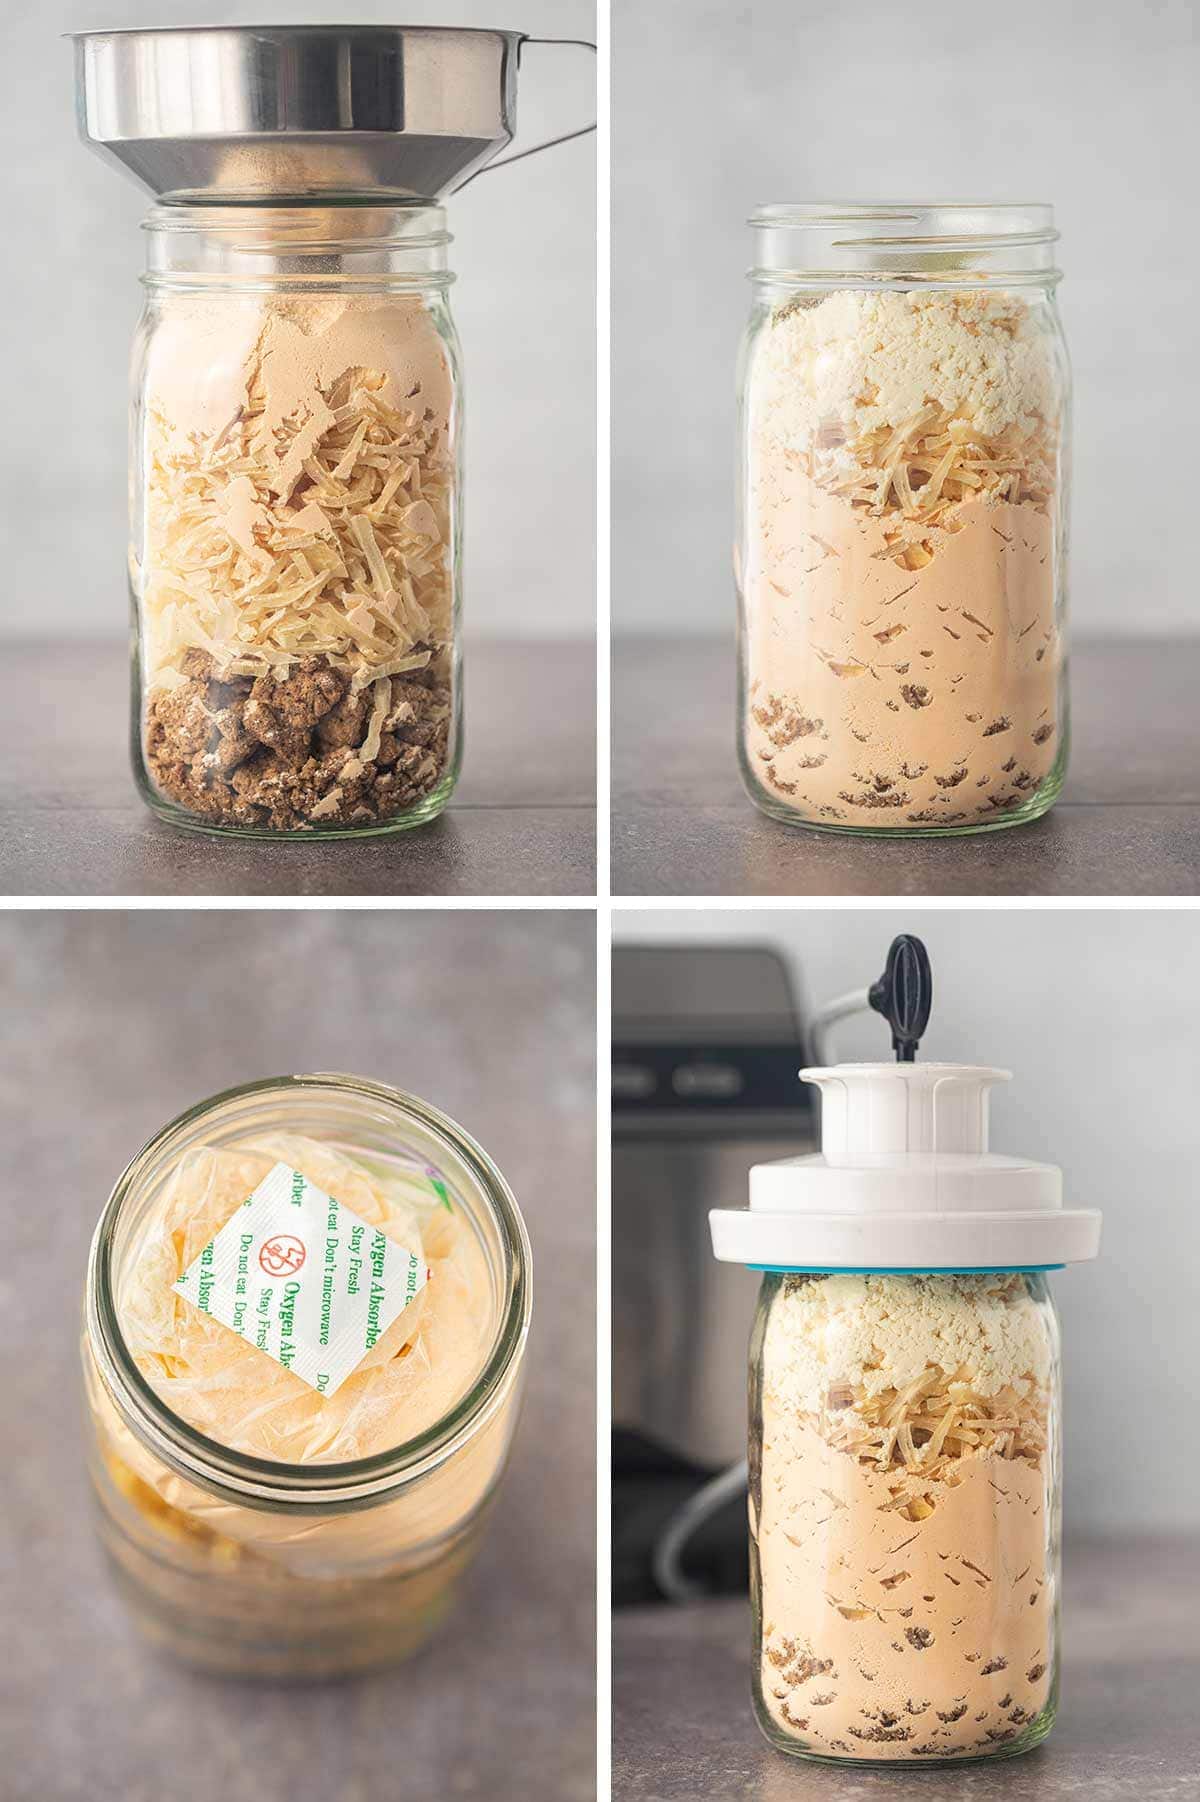 Collage of four photos showing the stages of filling dry ingredients into the mason jar for the Potato Cheese Sausage Casserole meal in a jar.